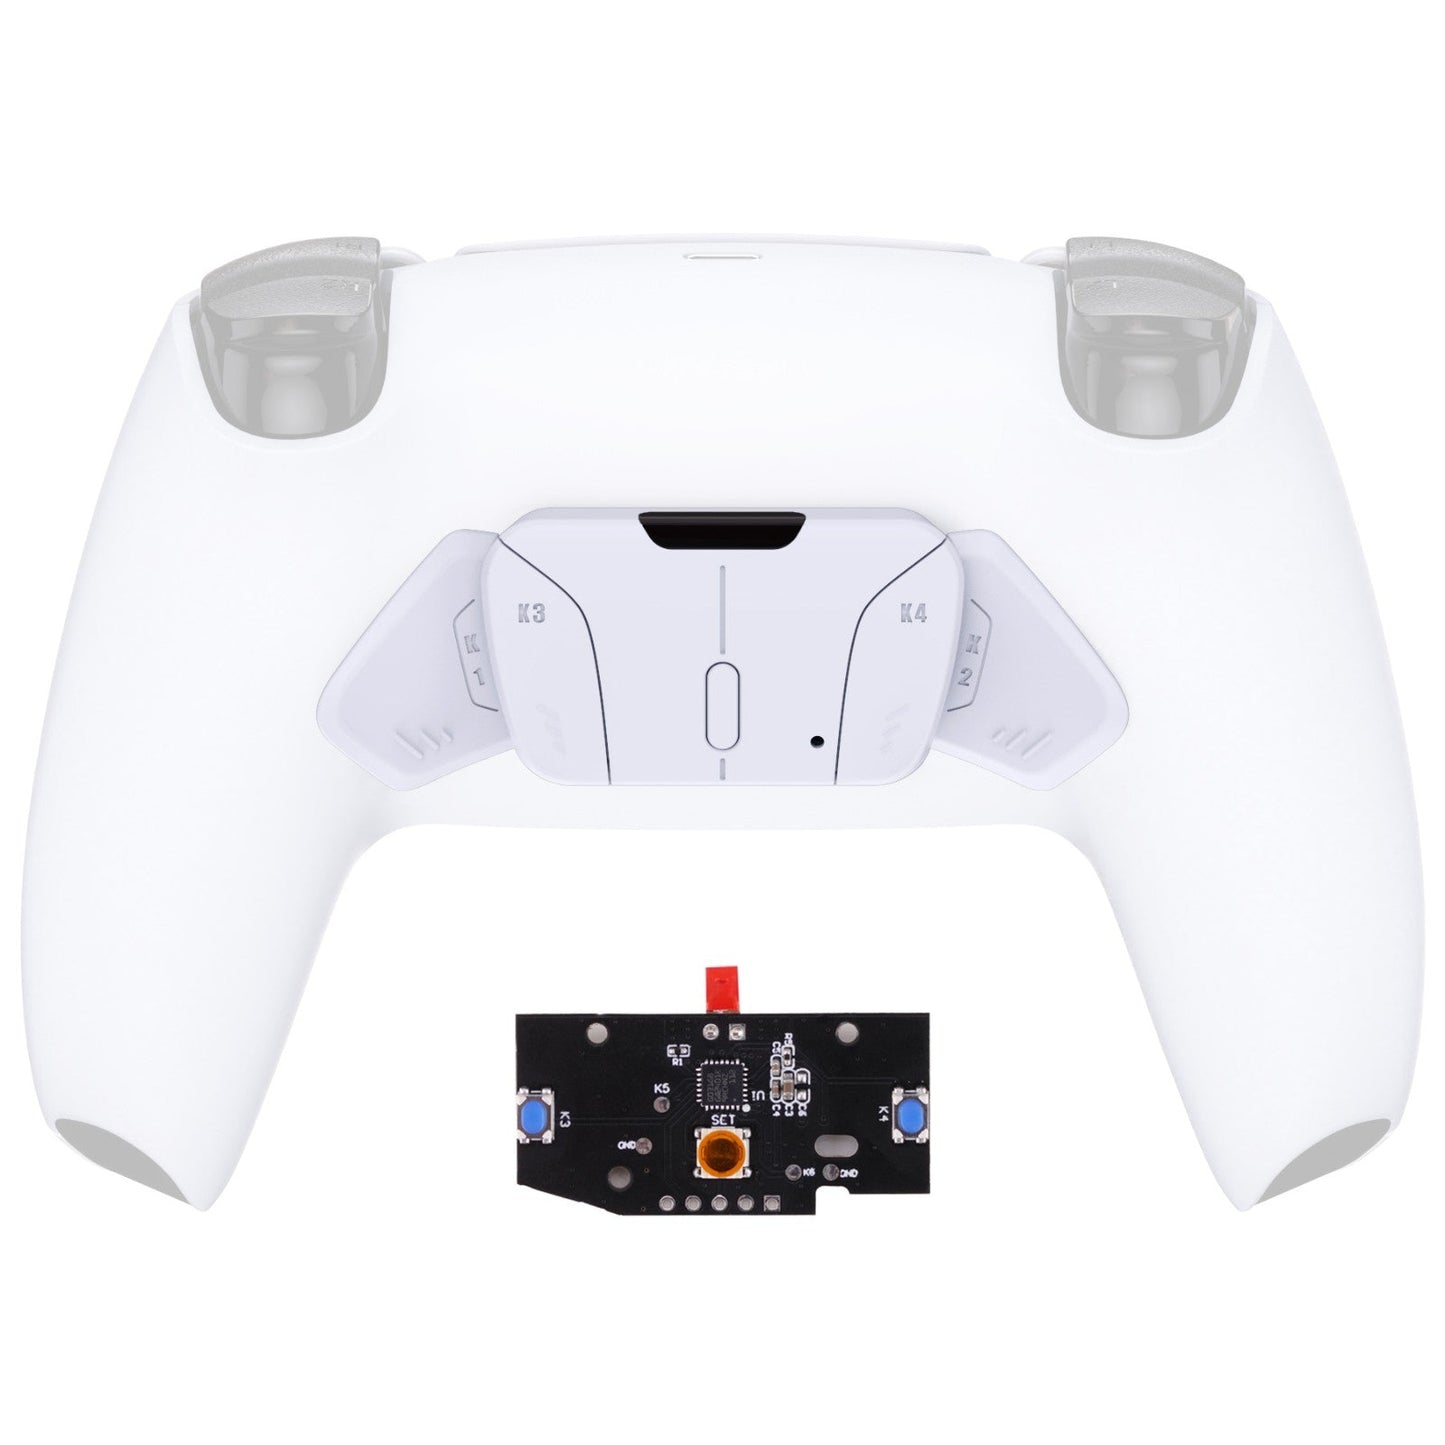 eXtremeRate Retail Turn RISE to RISE4 Kit – Redesigned White K1 K2 K3 K4 Back Buttons Housing & Remap PCB Board for PS5 Controller eXtremeRate RISE & RISE4 Remap kit - Controller & Other RISE Accessories NOT Included - VPFM5002P